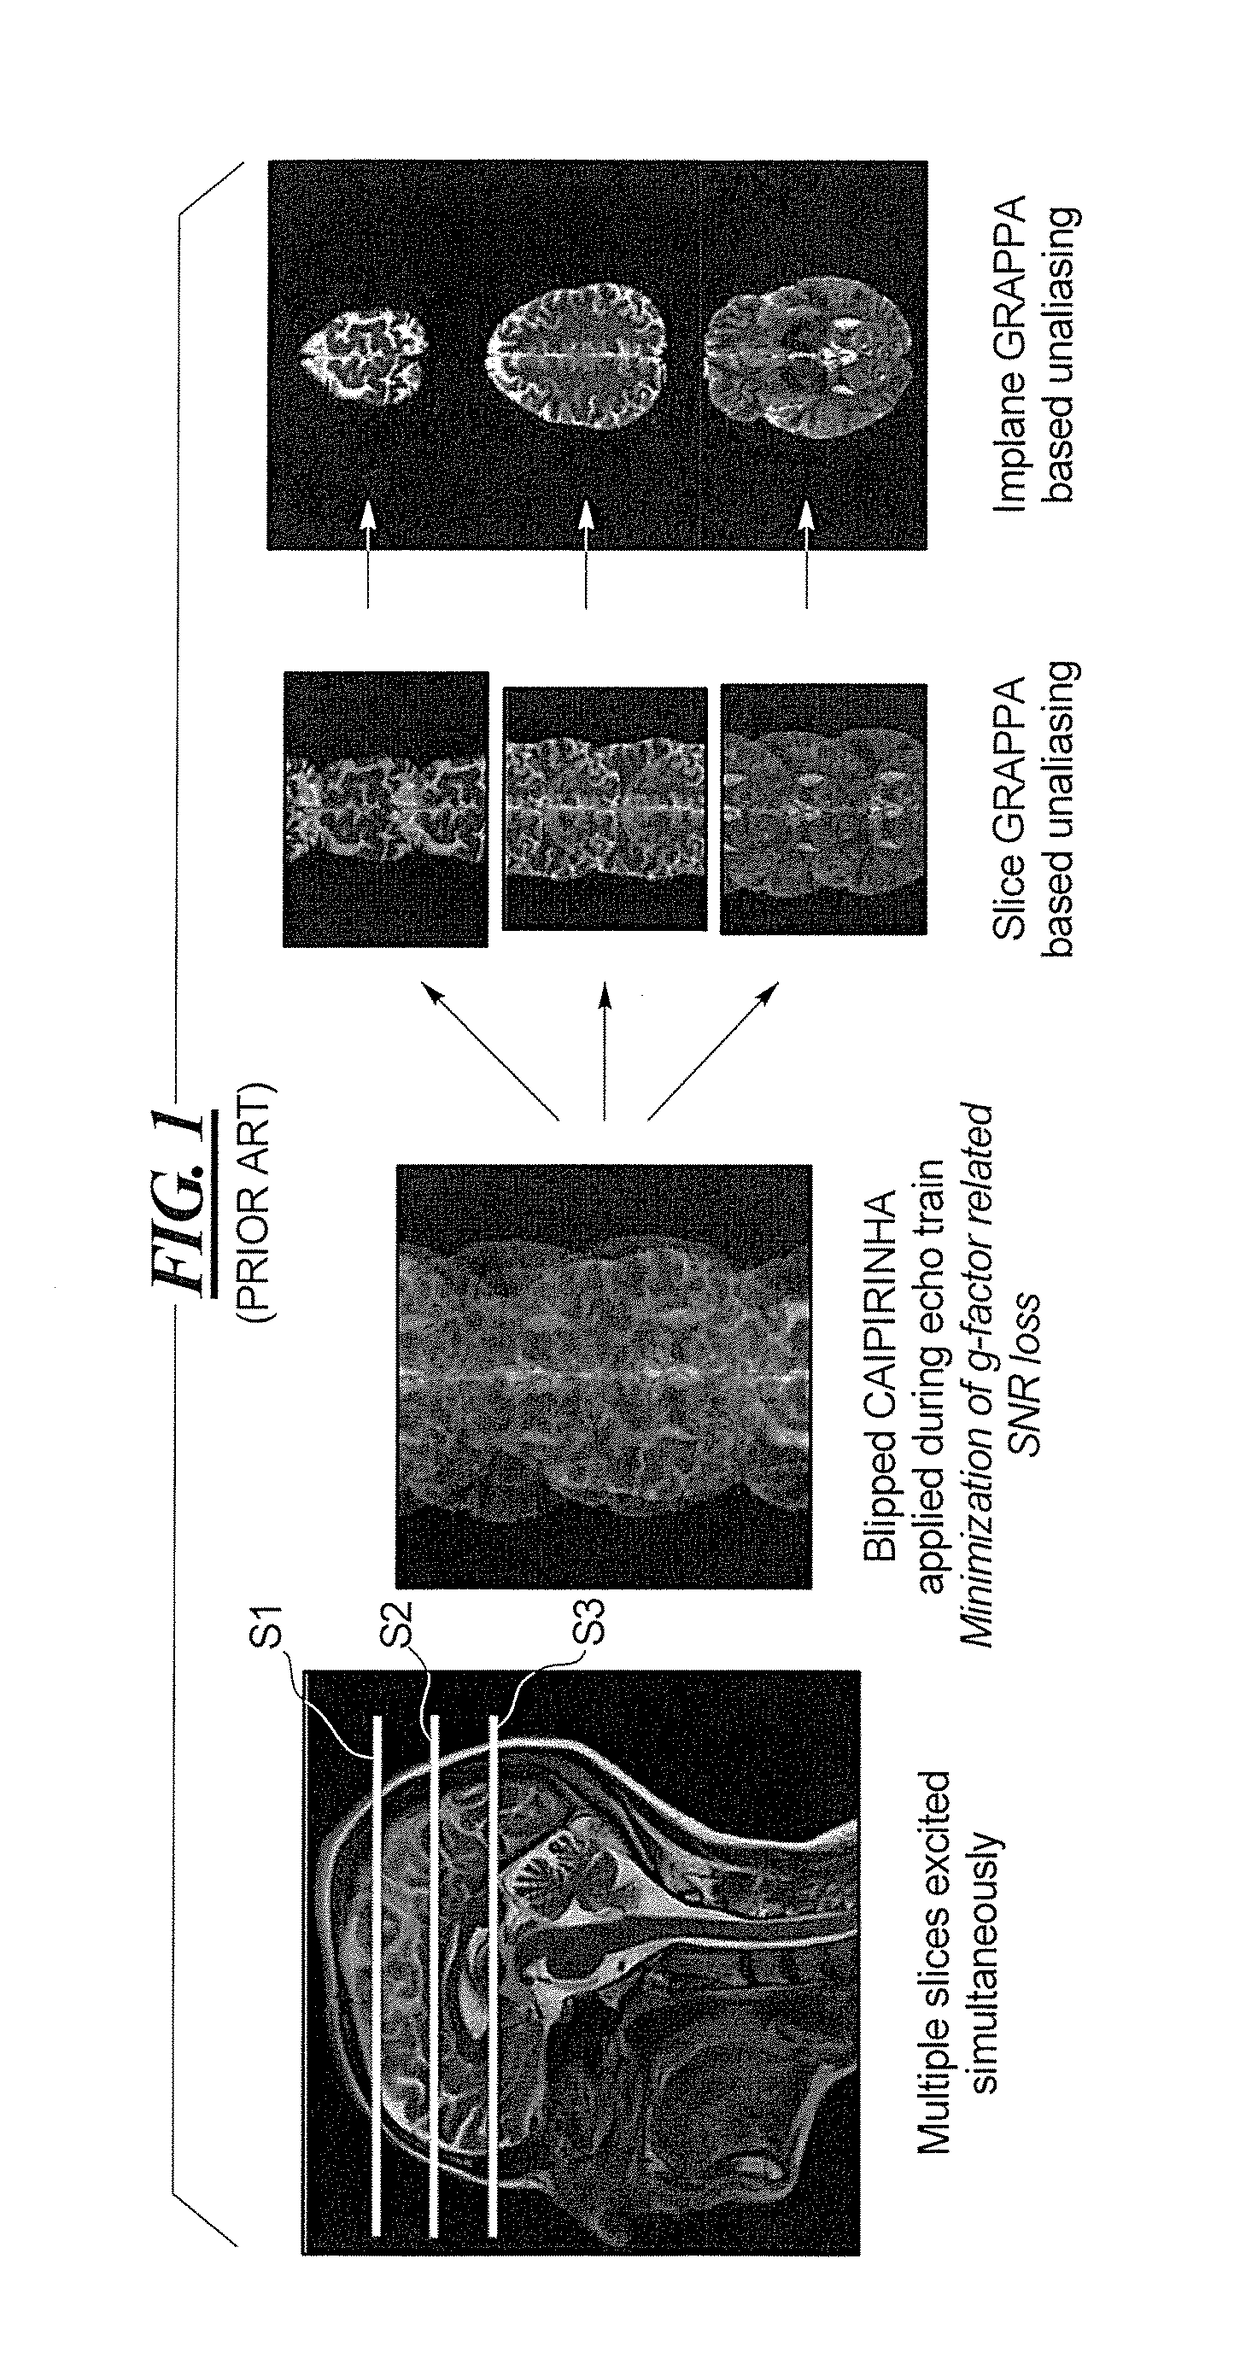 Multi-contrast simultaneous multislice magnetic resonance imaging with binomial radio-frequency pulses